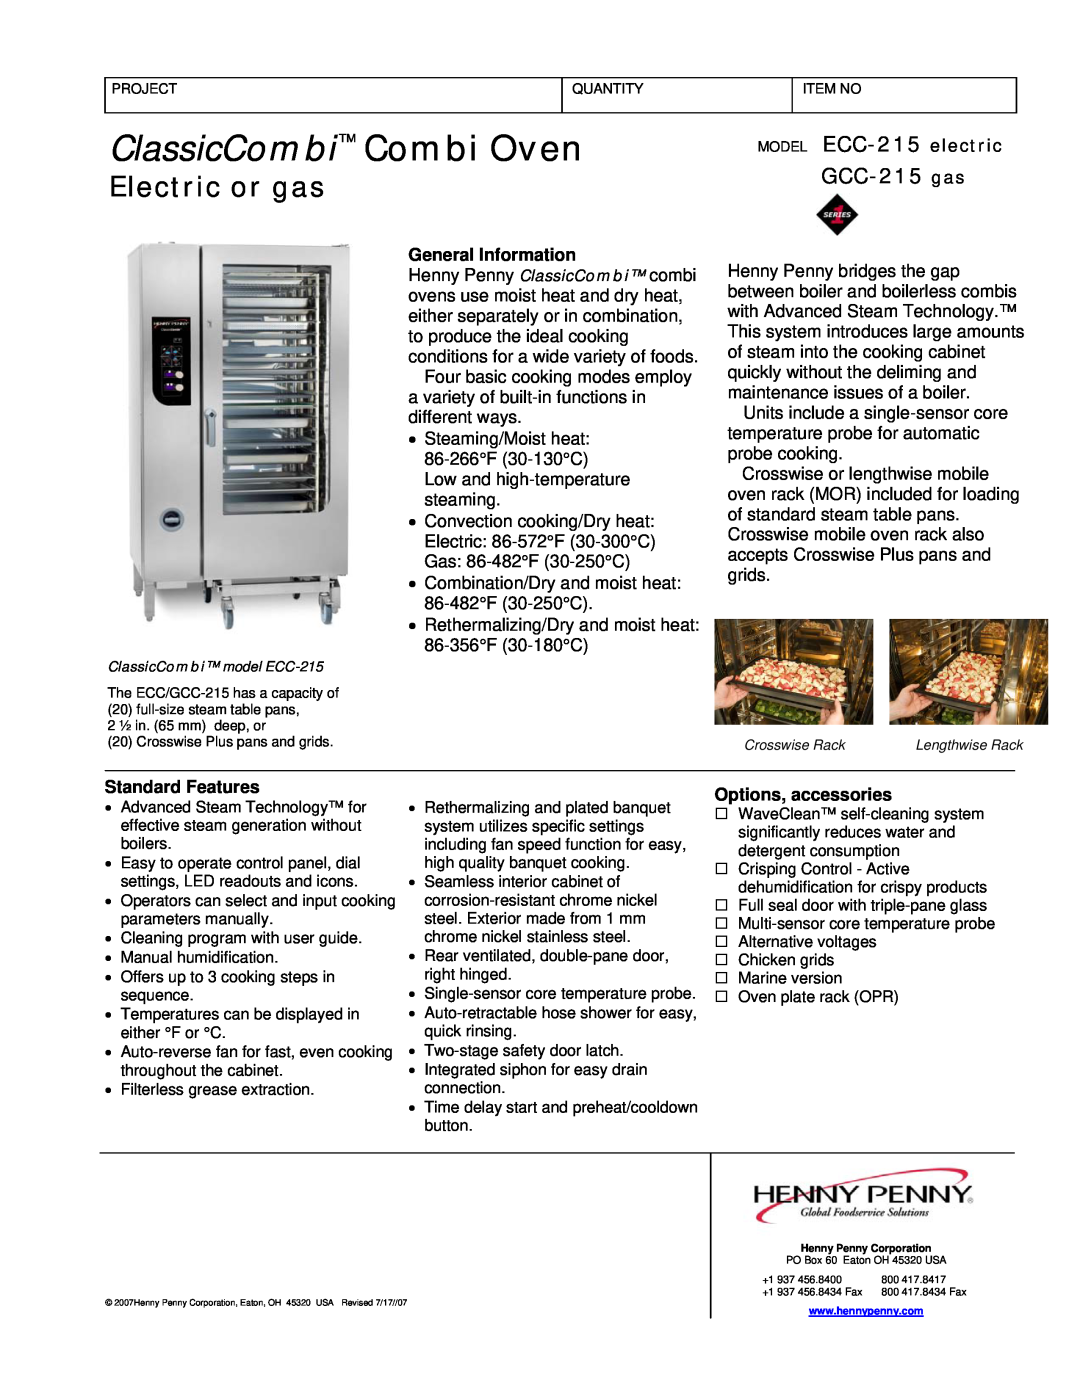 Henny Penny manual MODEL ECC-215 electric, GCC-215 gas, ClassicCombi Combi Oven, Electric or gas, General Information 